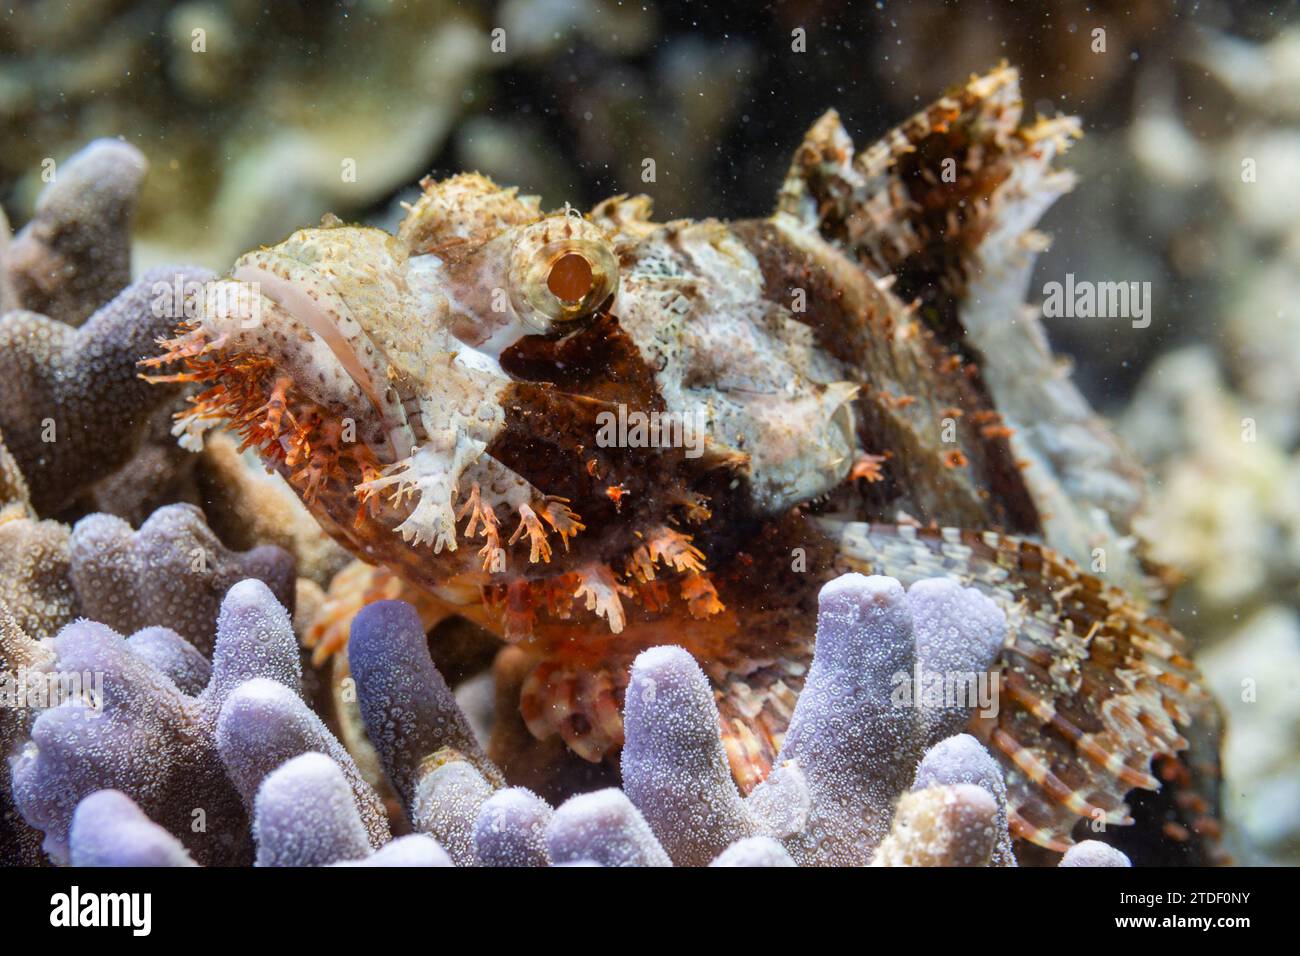 An adult tassled scorpionfish (Scorpaenopsis oxycephalus) camouflaged in the coral, Port Airboret, Raja Ampat, Indonesia, Southeast Asia Stock Photo